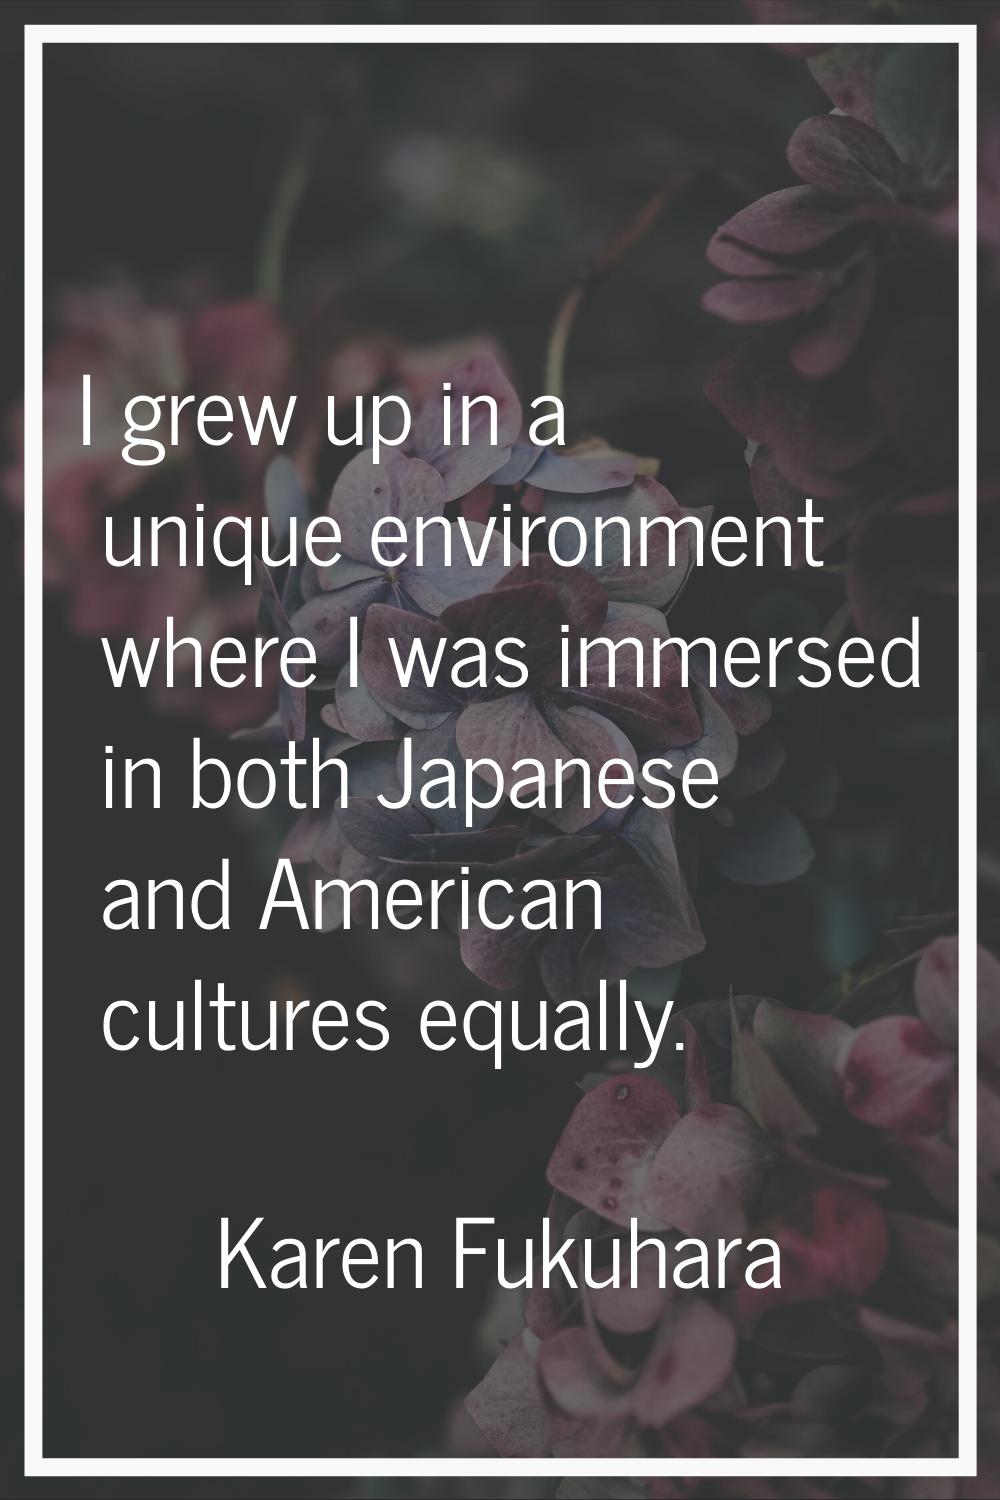 I grew up in a unique environment where I was immersed in both Japanese and American cultures equal